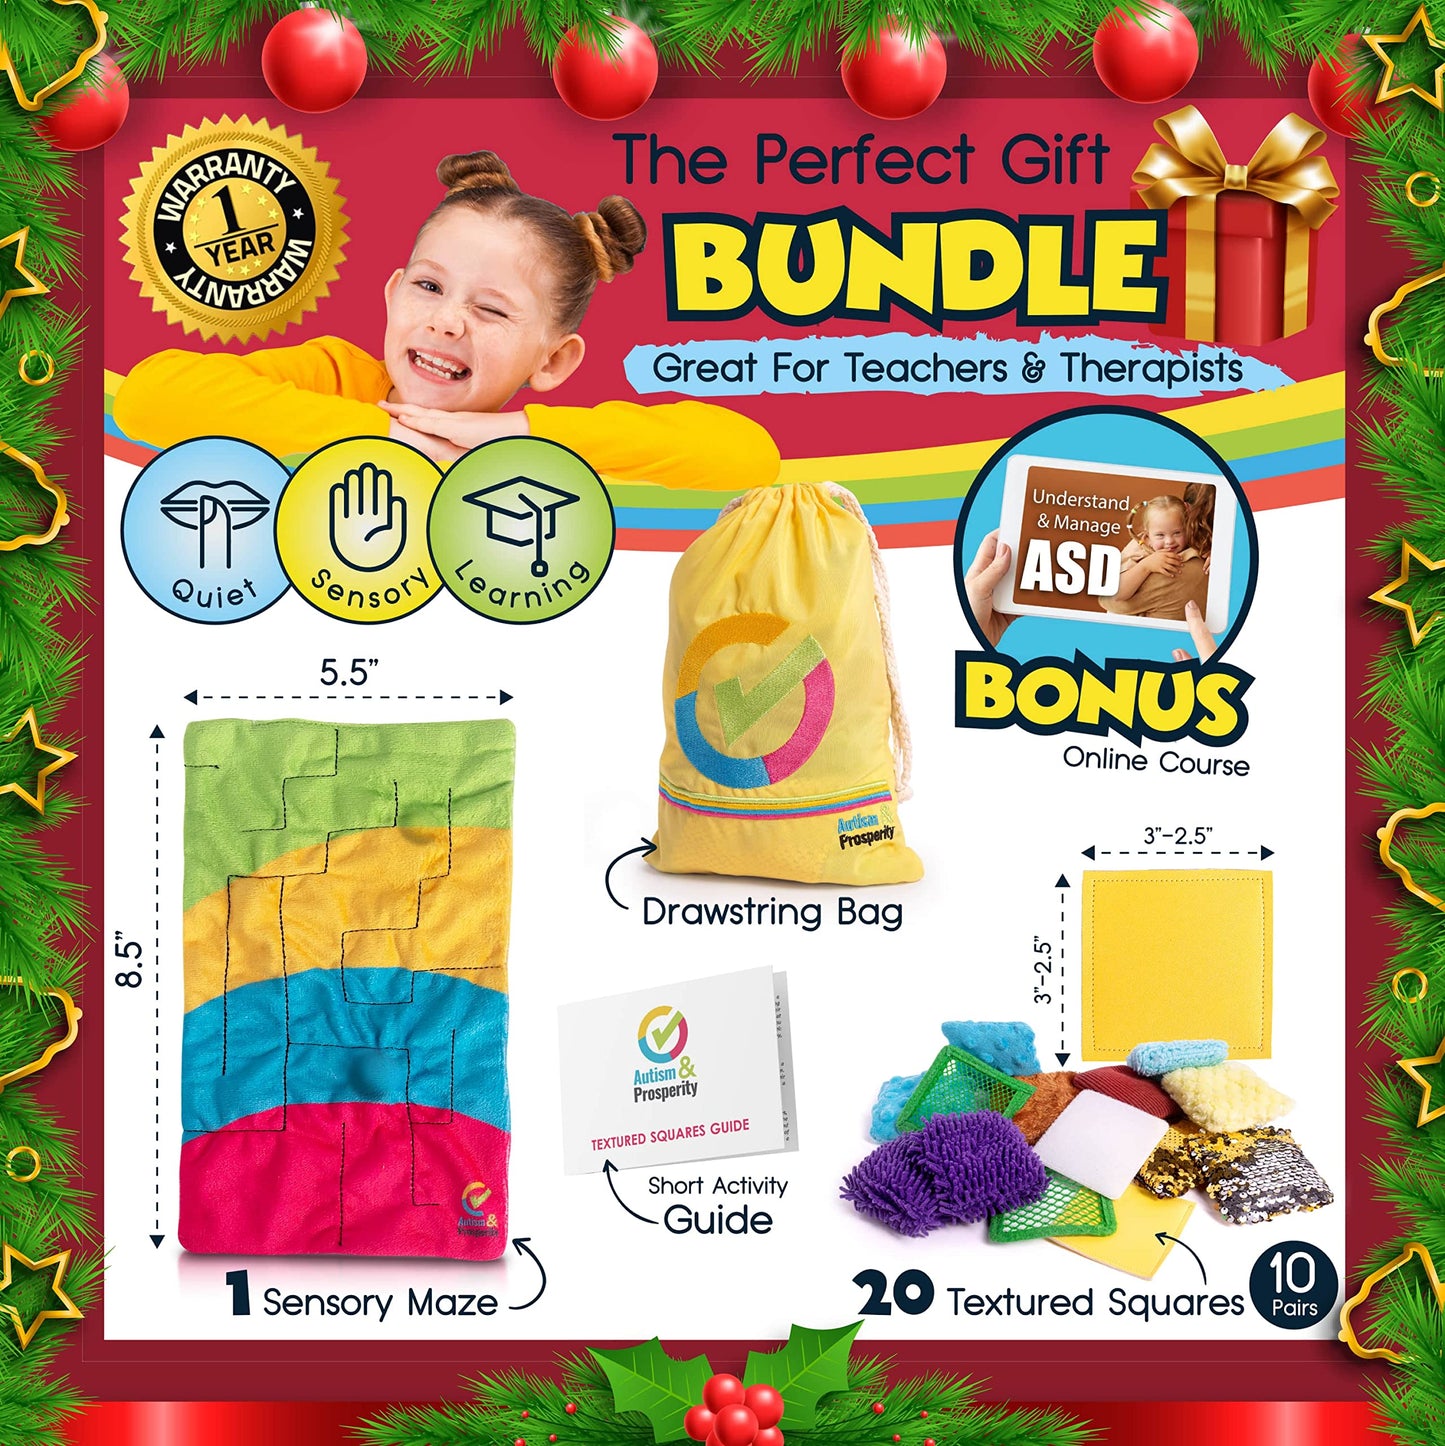 Autism & Prosperity Kids Toys Quiet & Education Sensory Stim Alt Autistic Children Bundle, ASD Boys Girl Teen Special Needs Classroom No 1-3 Toddlers Age 3 4 5-7 8-12 Products Games Learning Materials